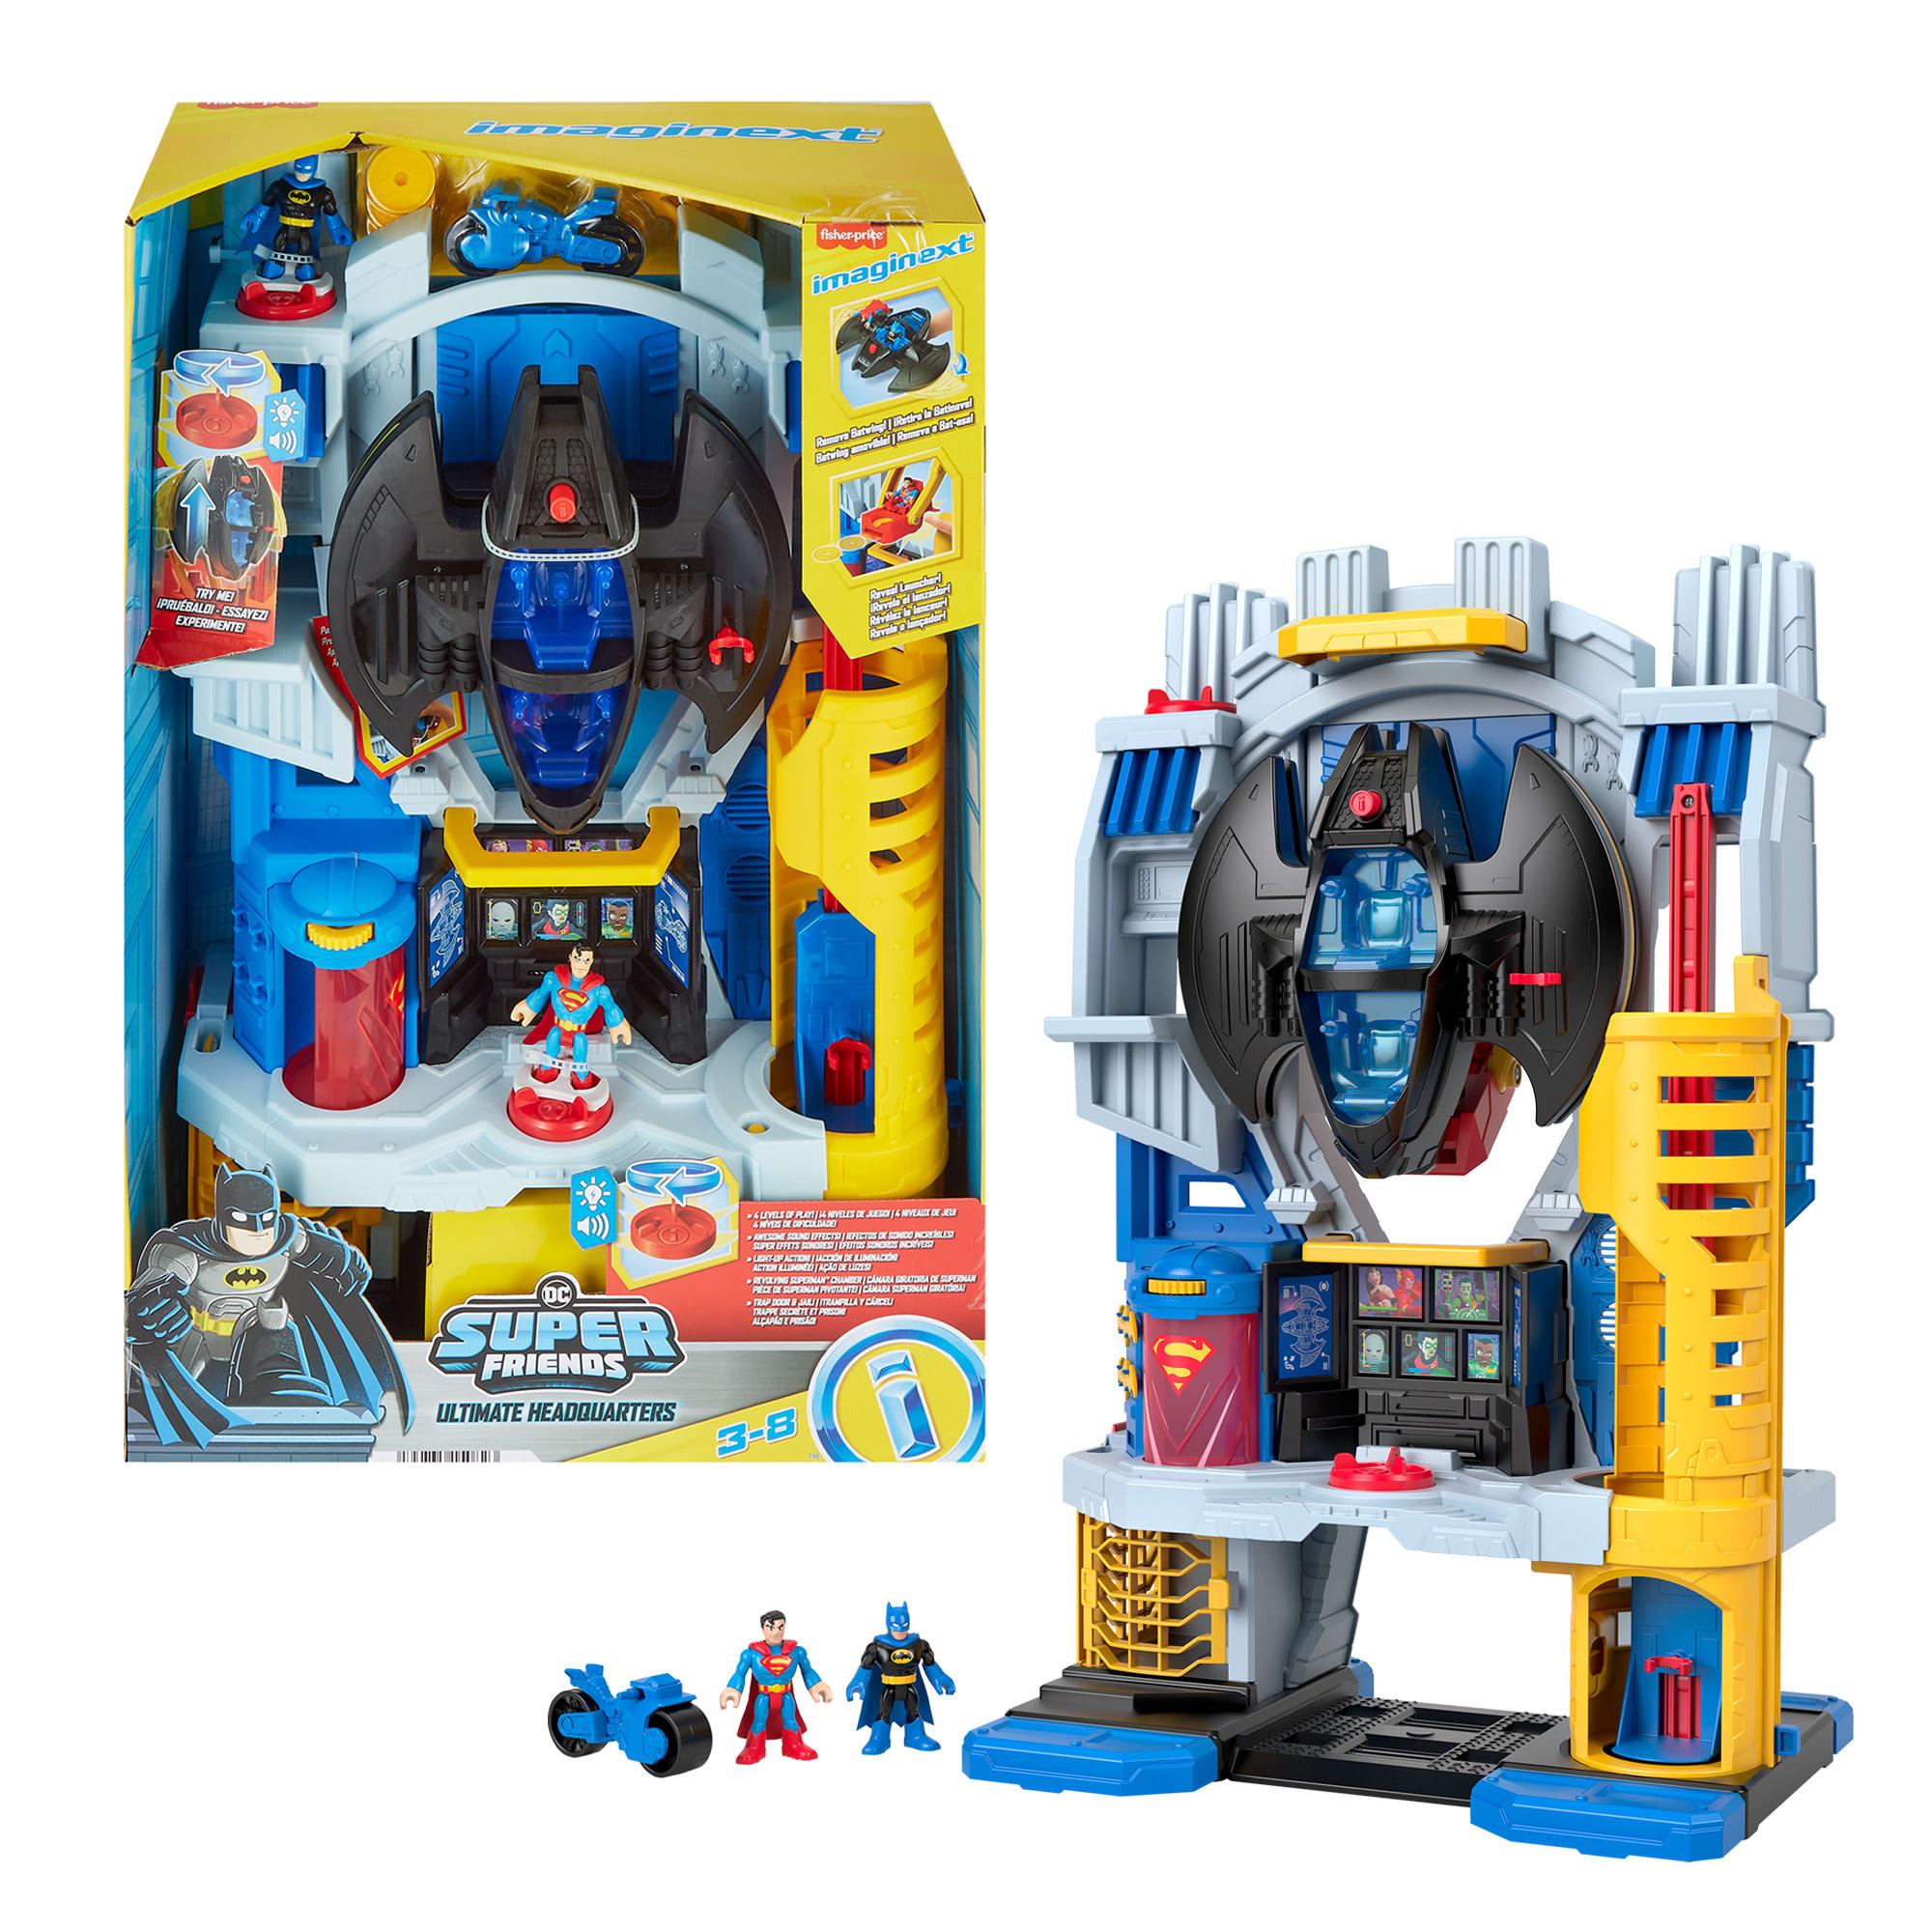 Imaginext DC Super Friends Ultimate Headquarters Playset with